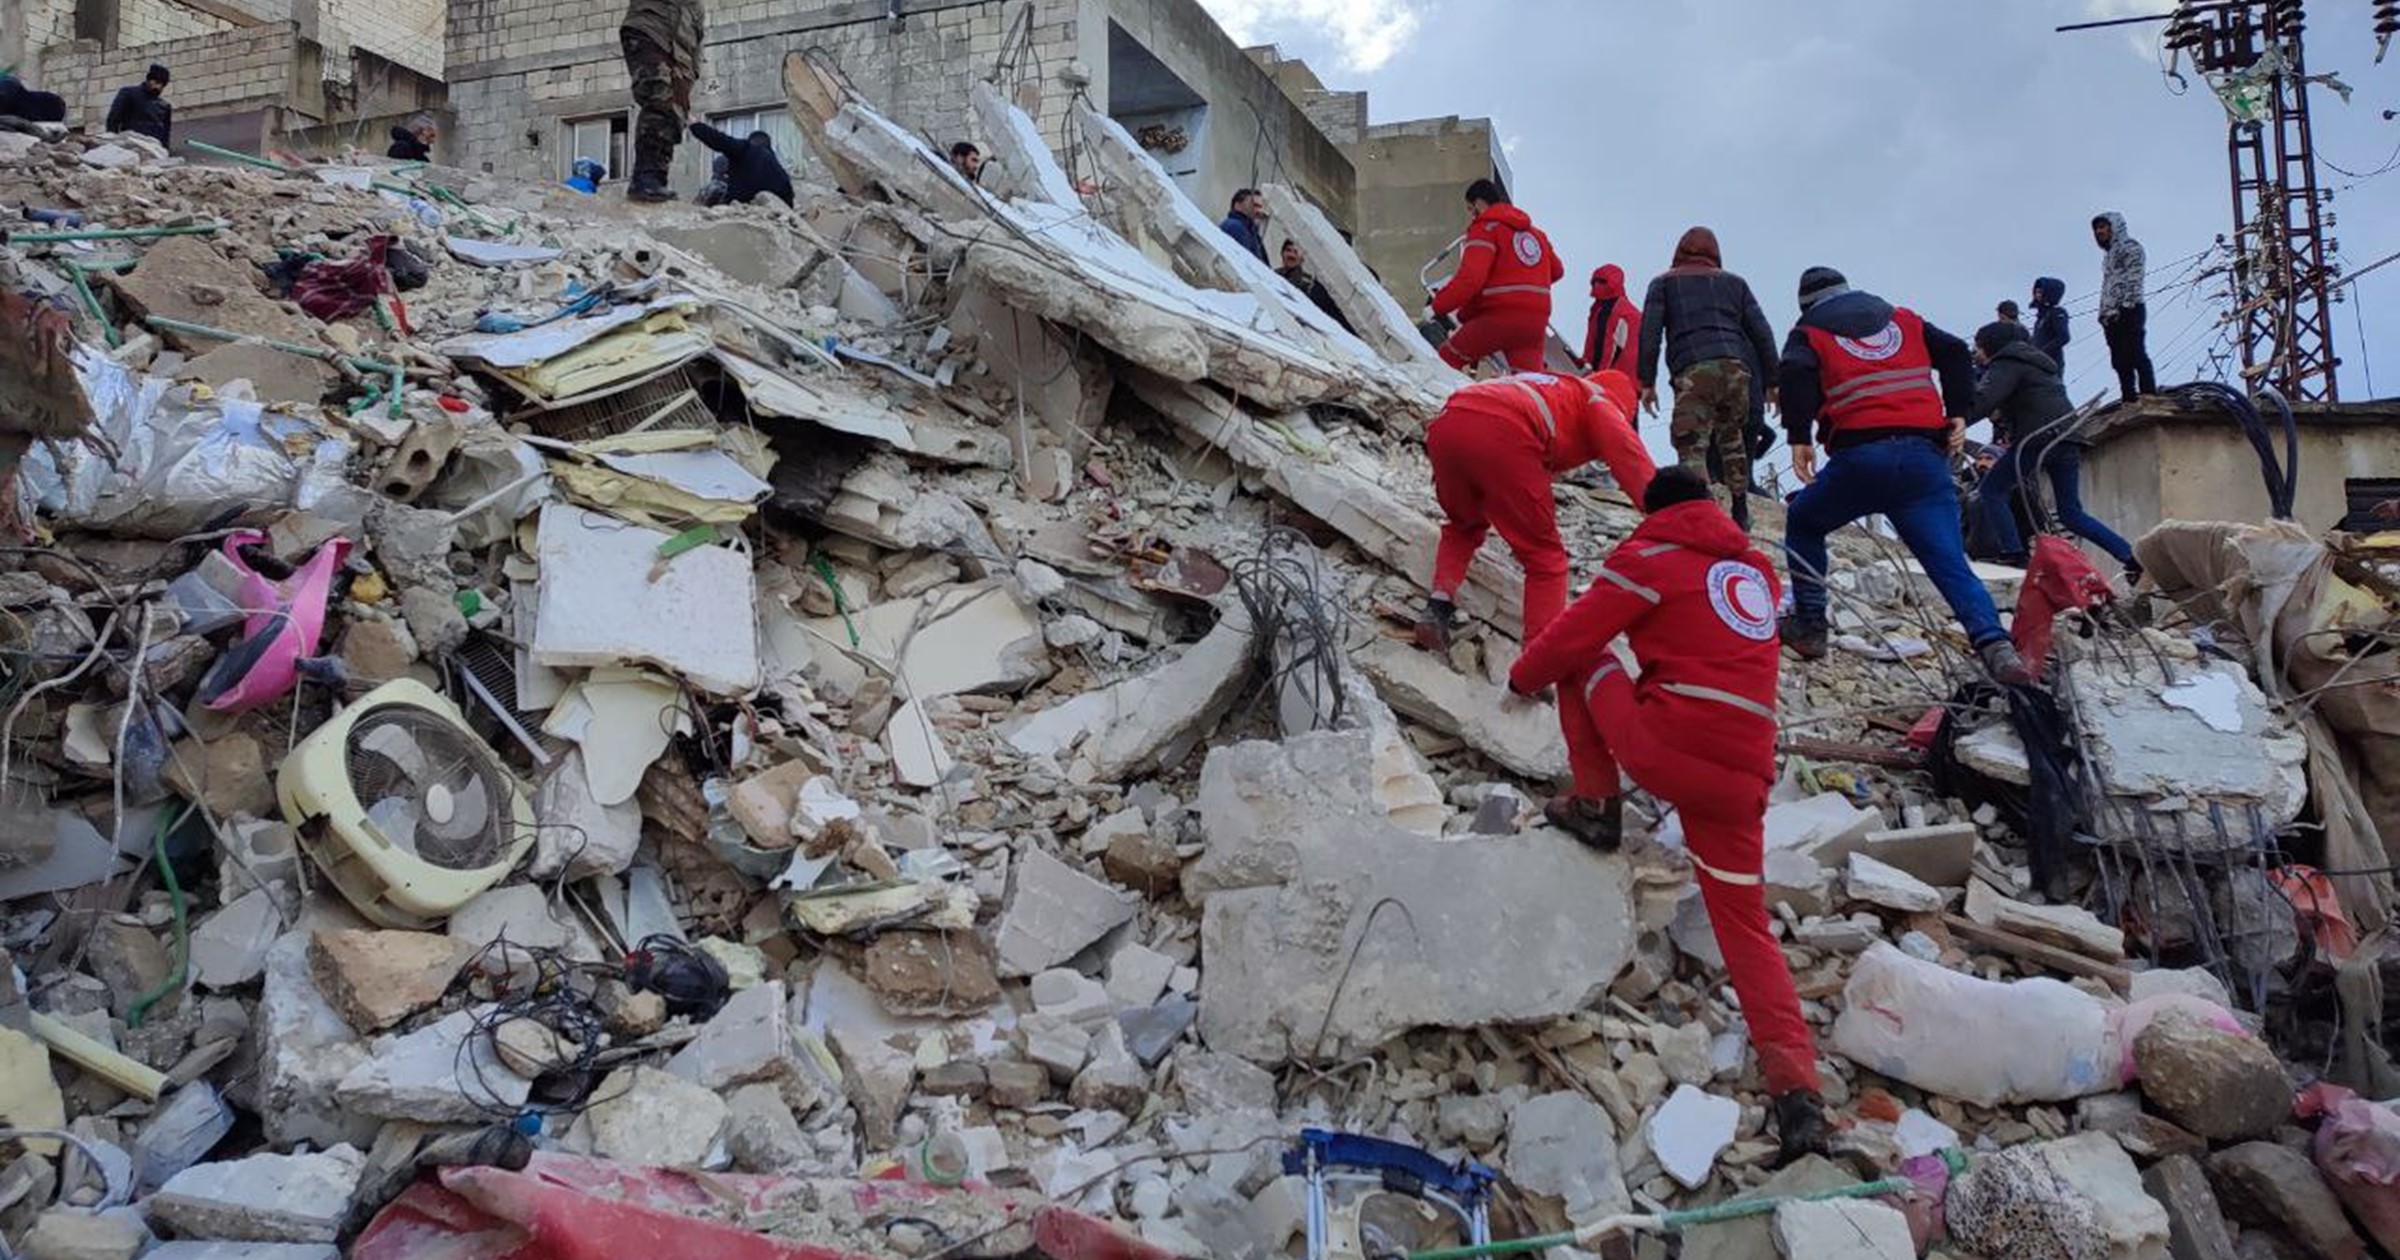 The Digital Response to the Earthquakes  in Türkiye and Syria